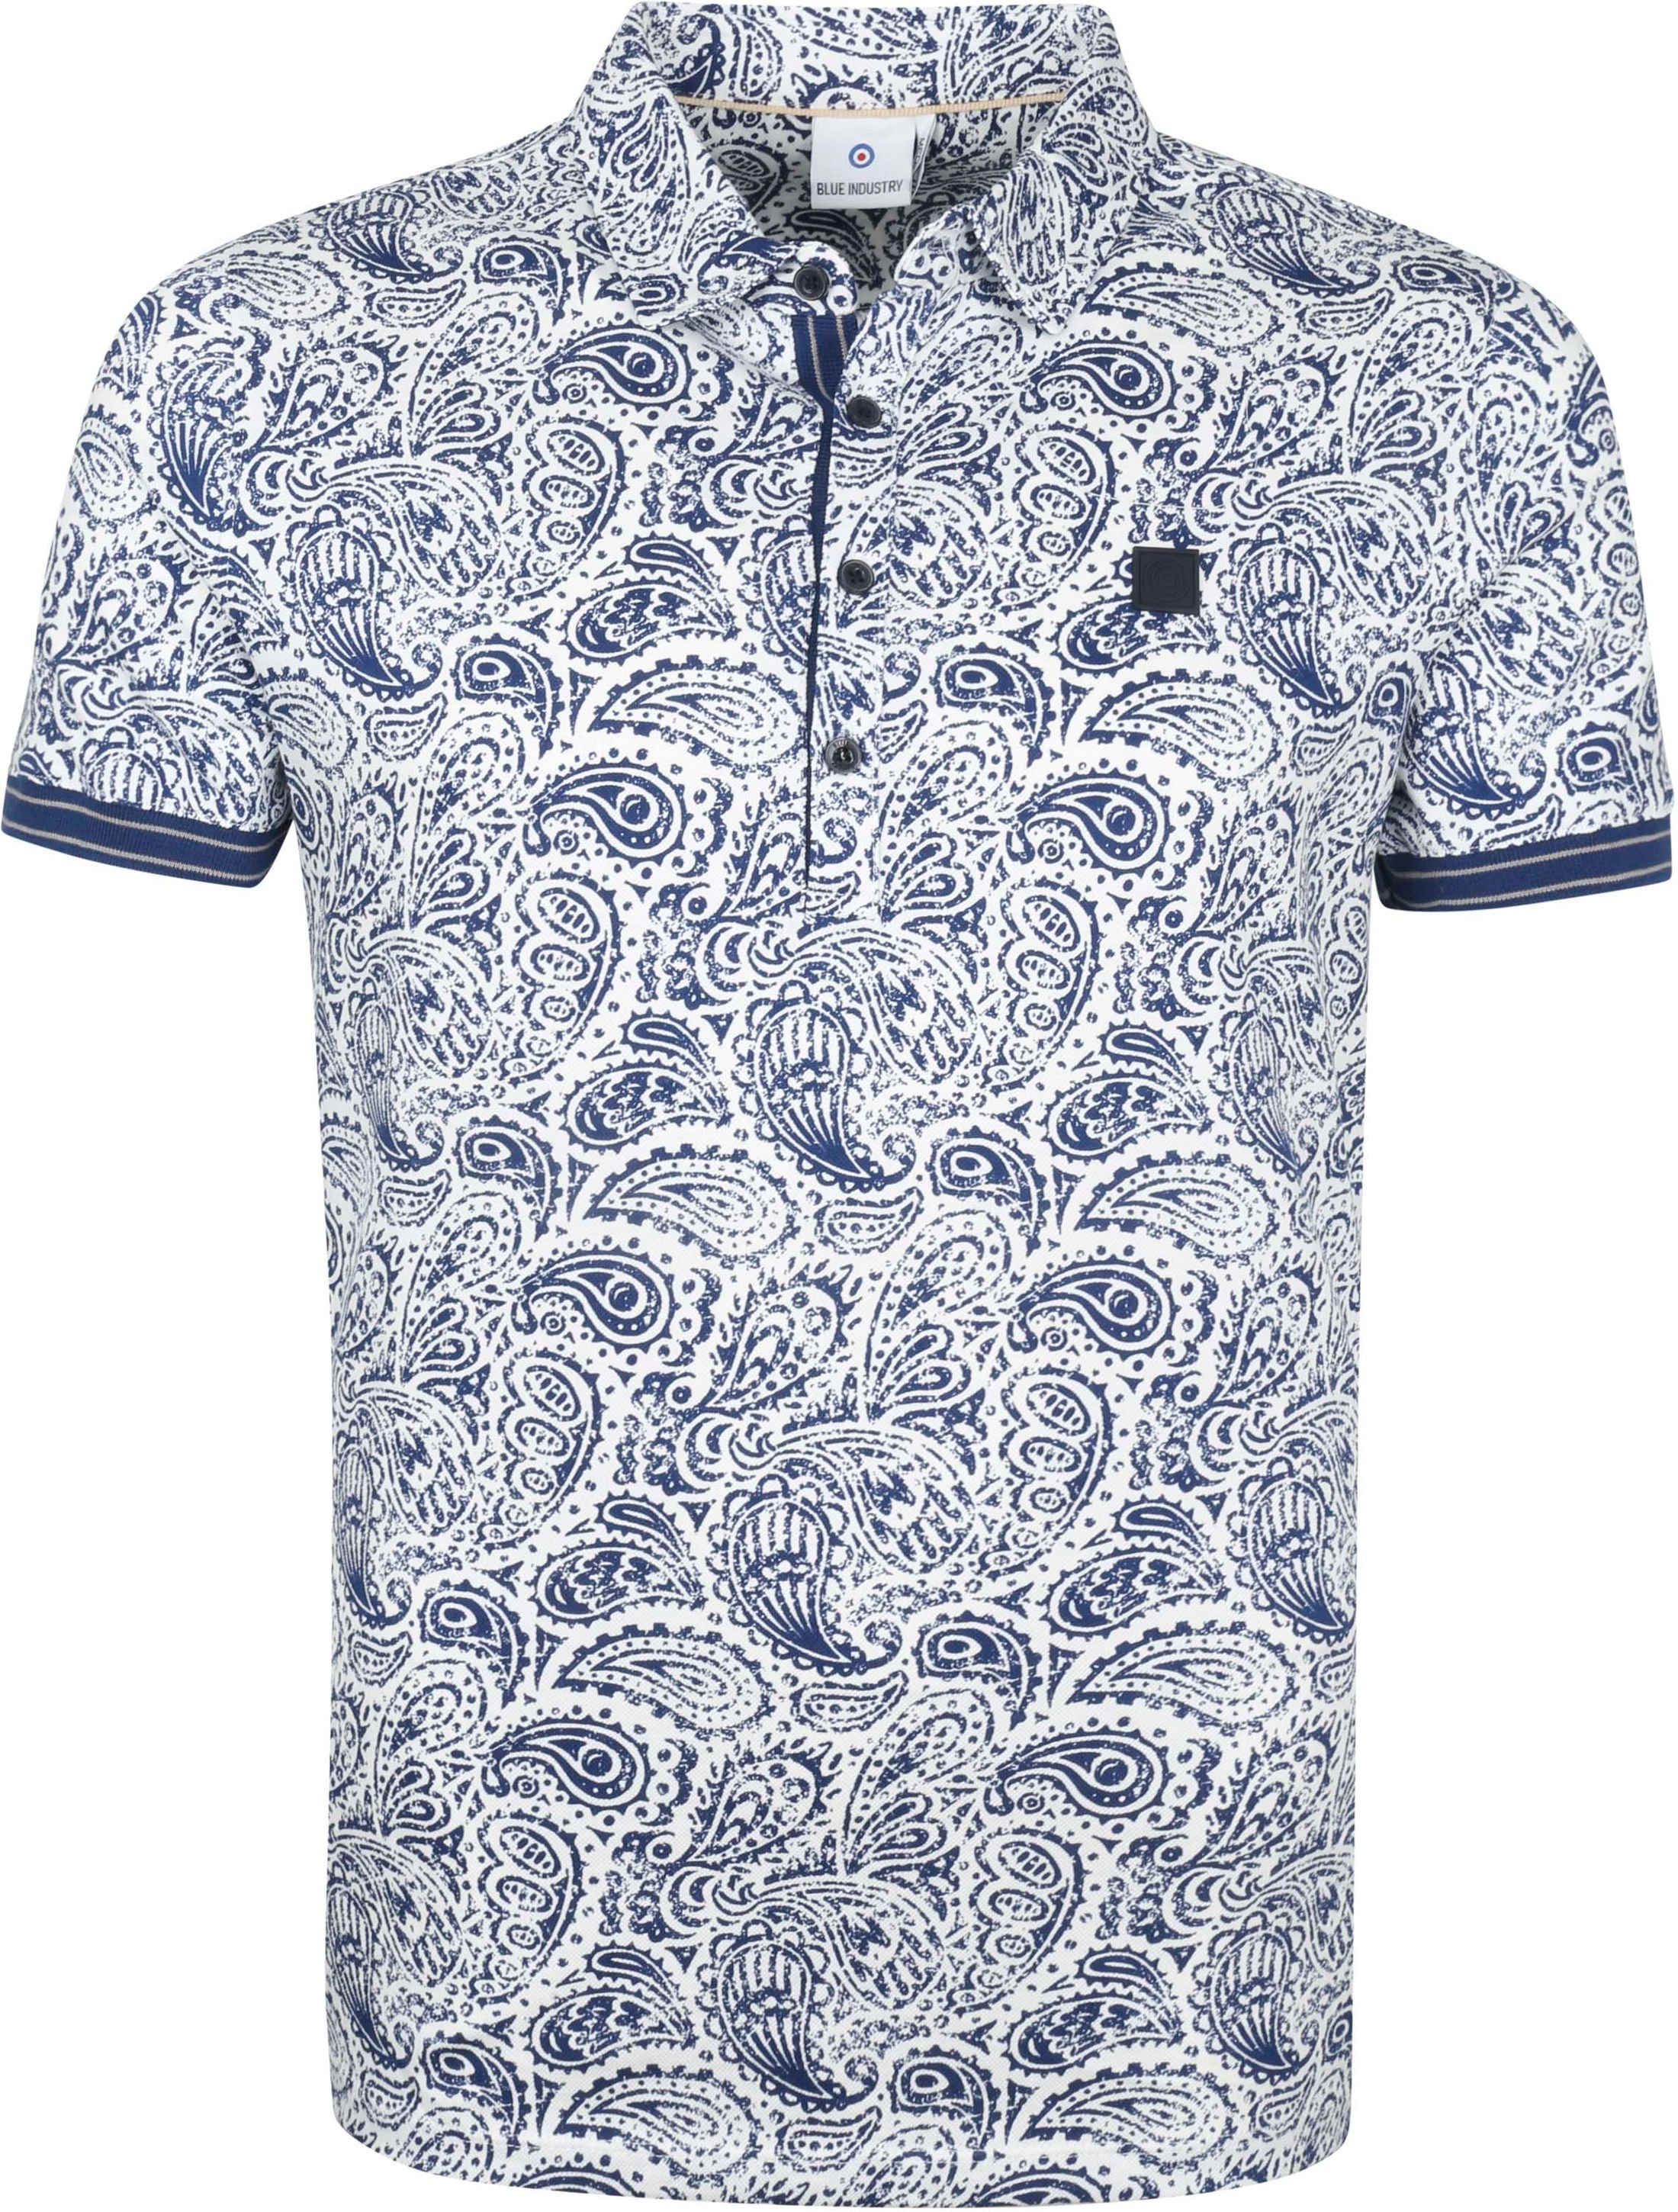 Industry M25 Polo Shirt Paisley Blue Dark Blue size L